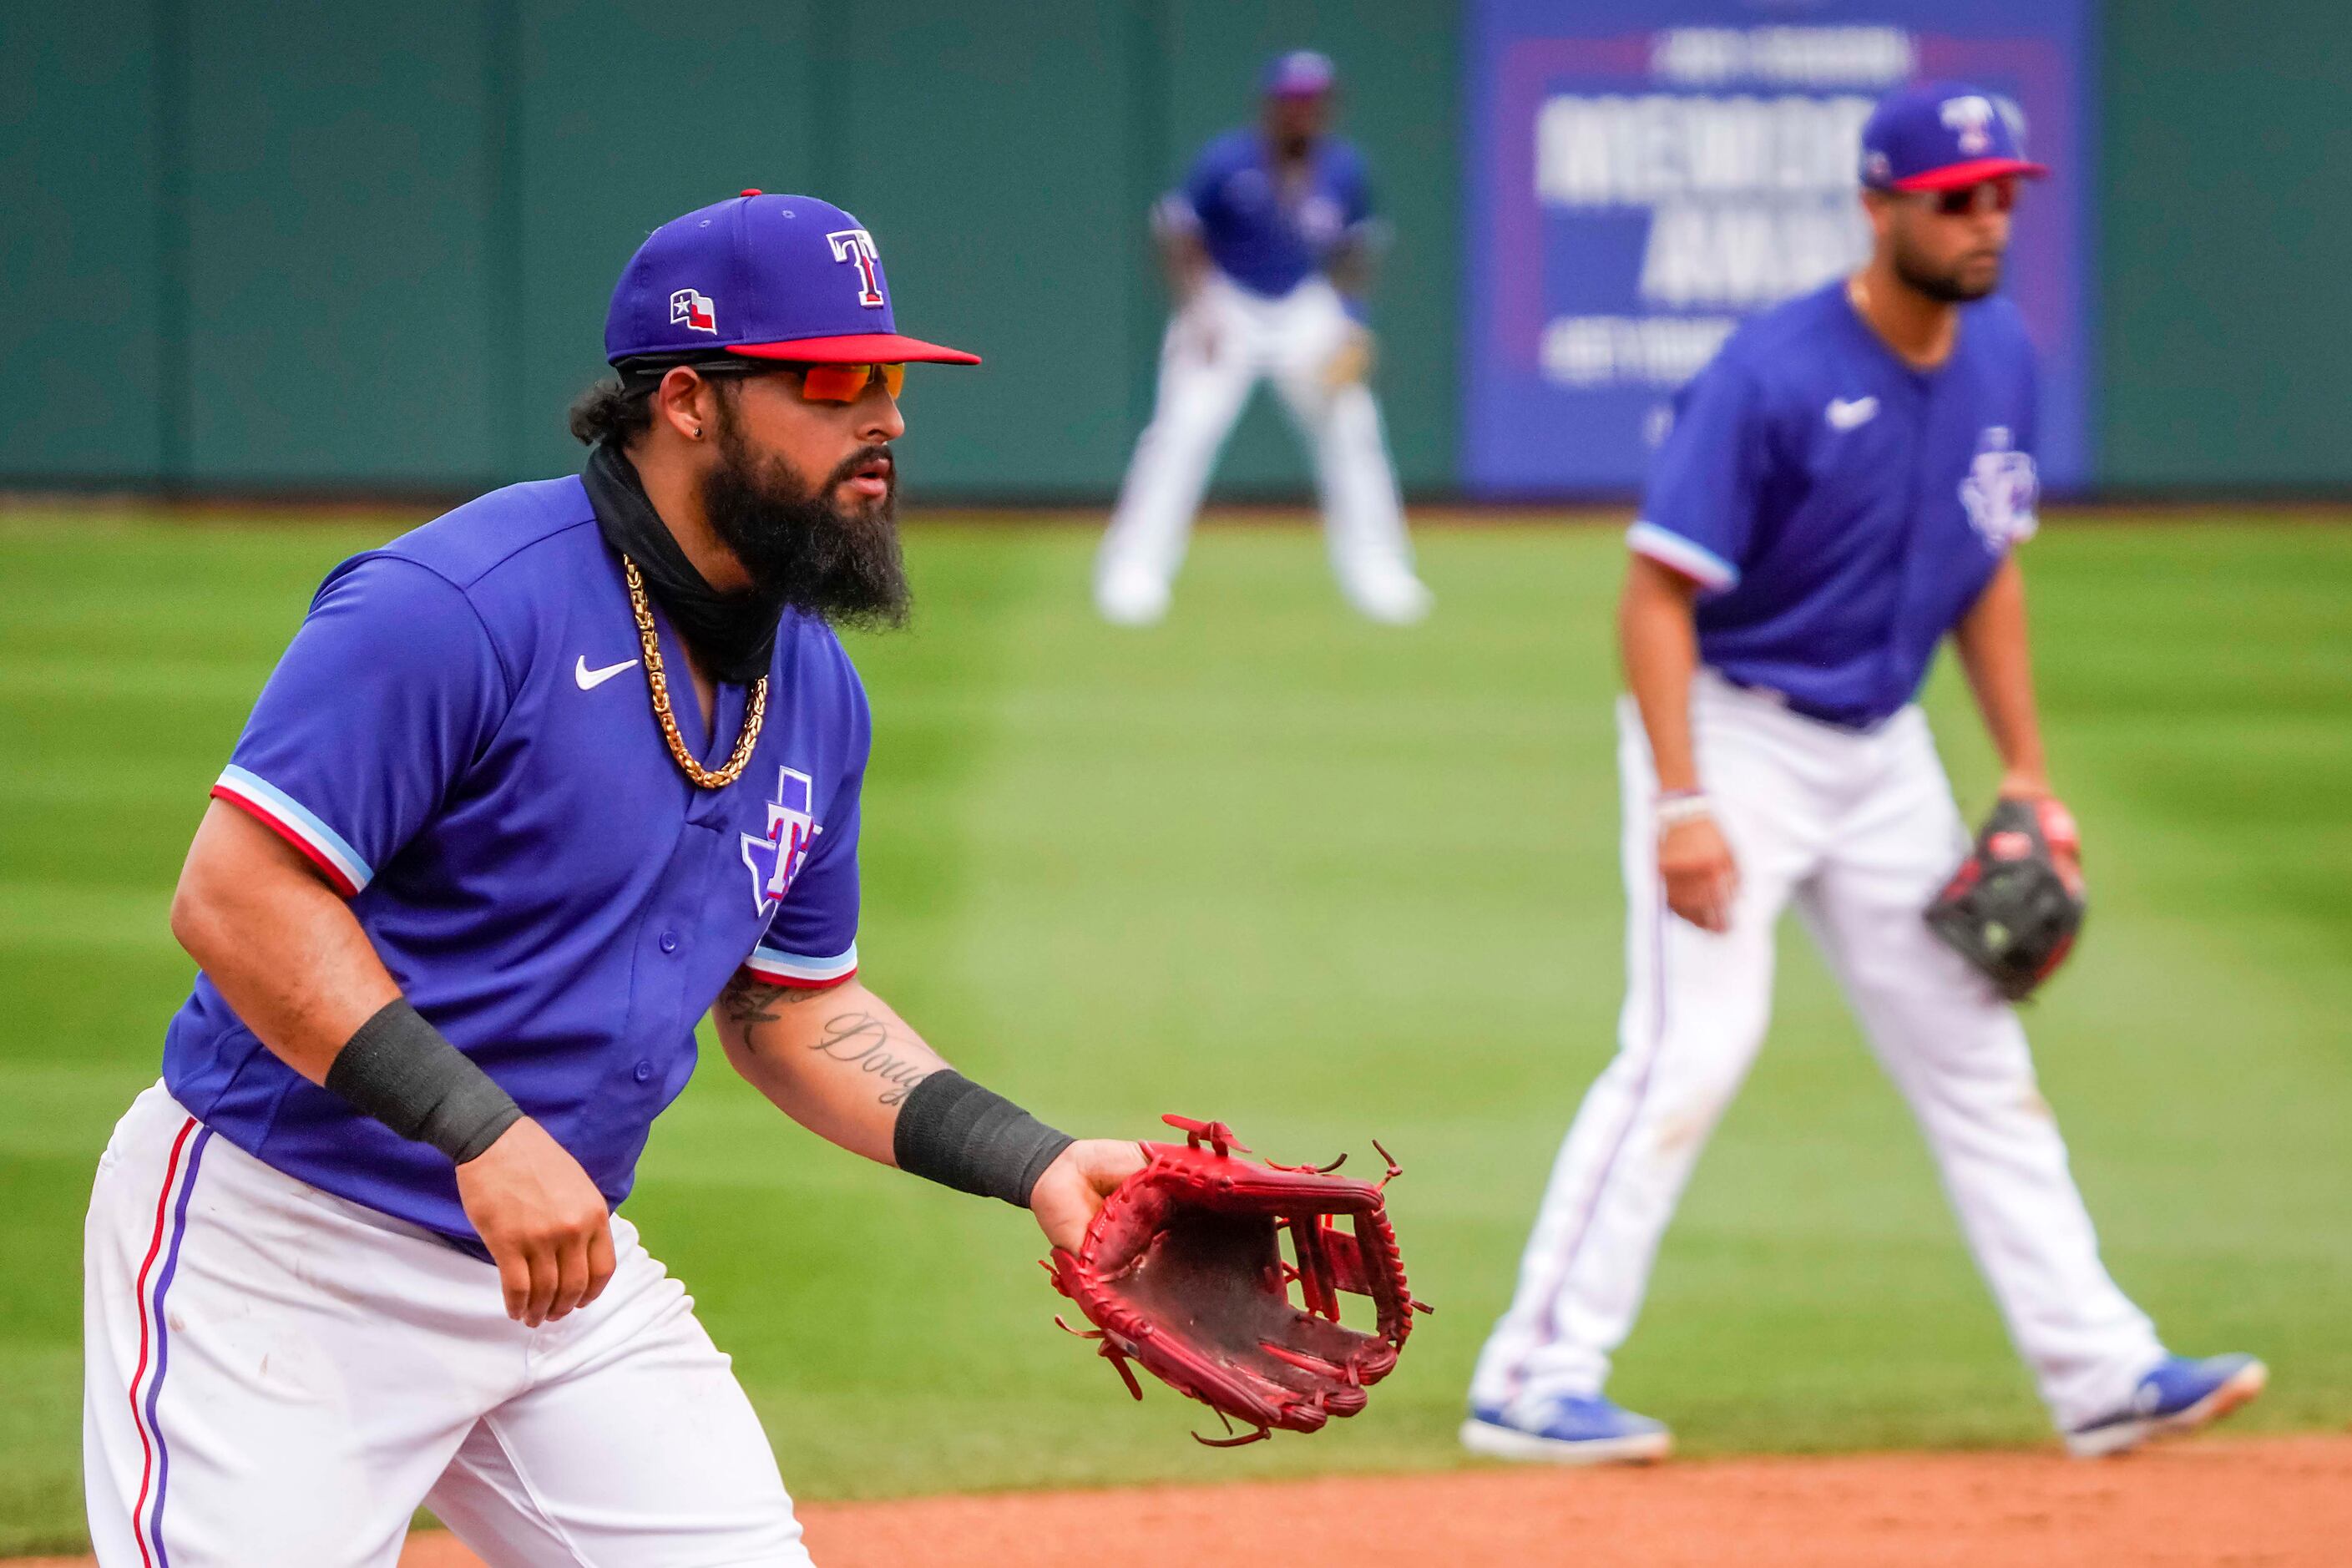 Roughned Odor traded from Rangers to Yankees - NBC Sports